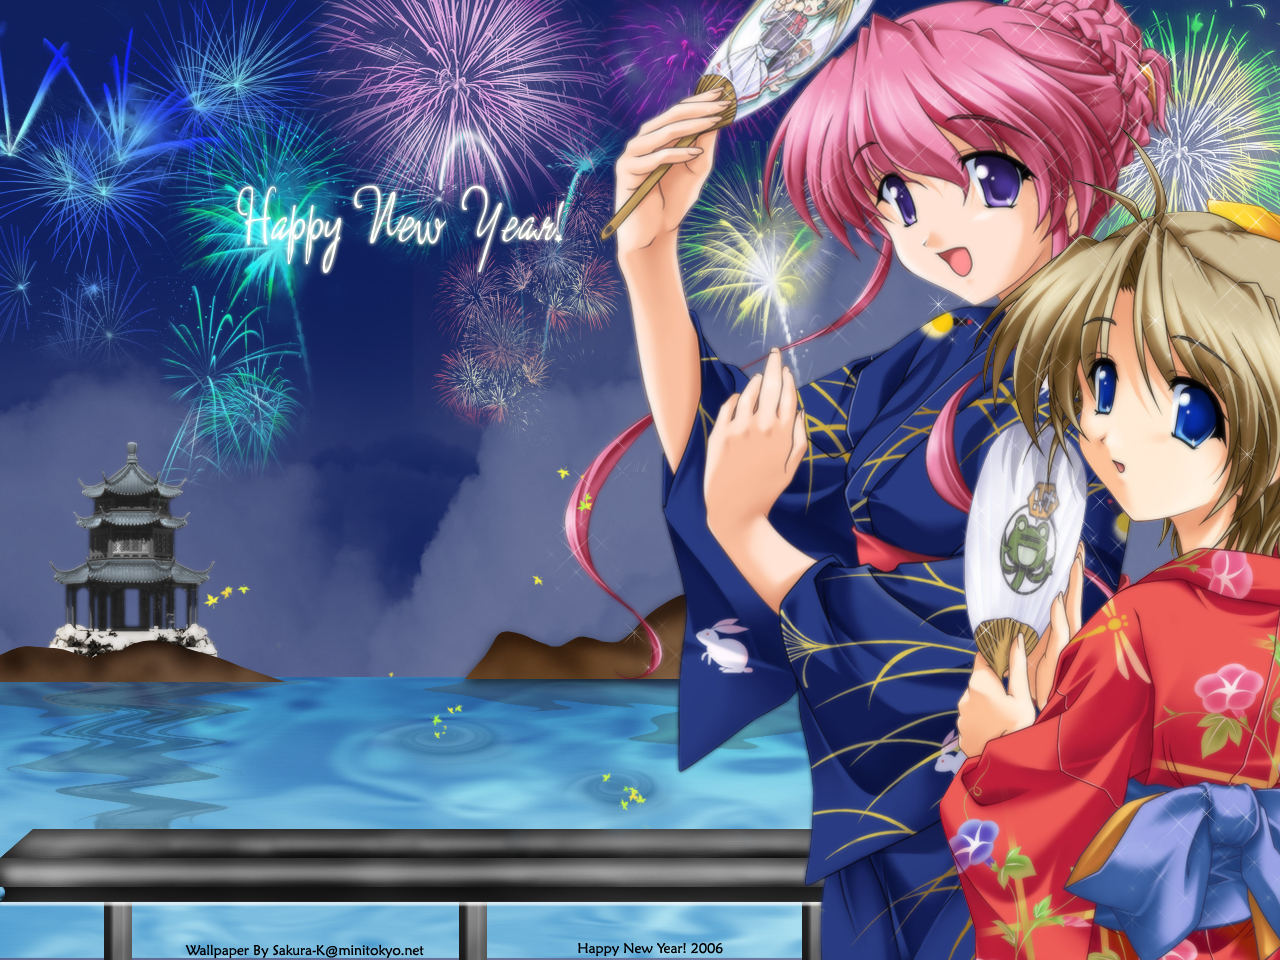 anime girl~Happy new year~ Animated Picture Codes and Downloads  #120016022,684995605 | Blingee.com